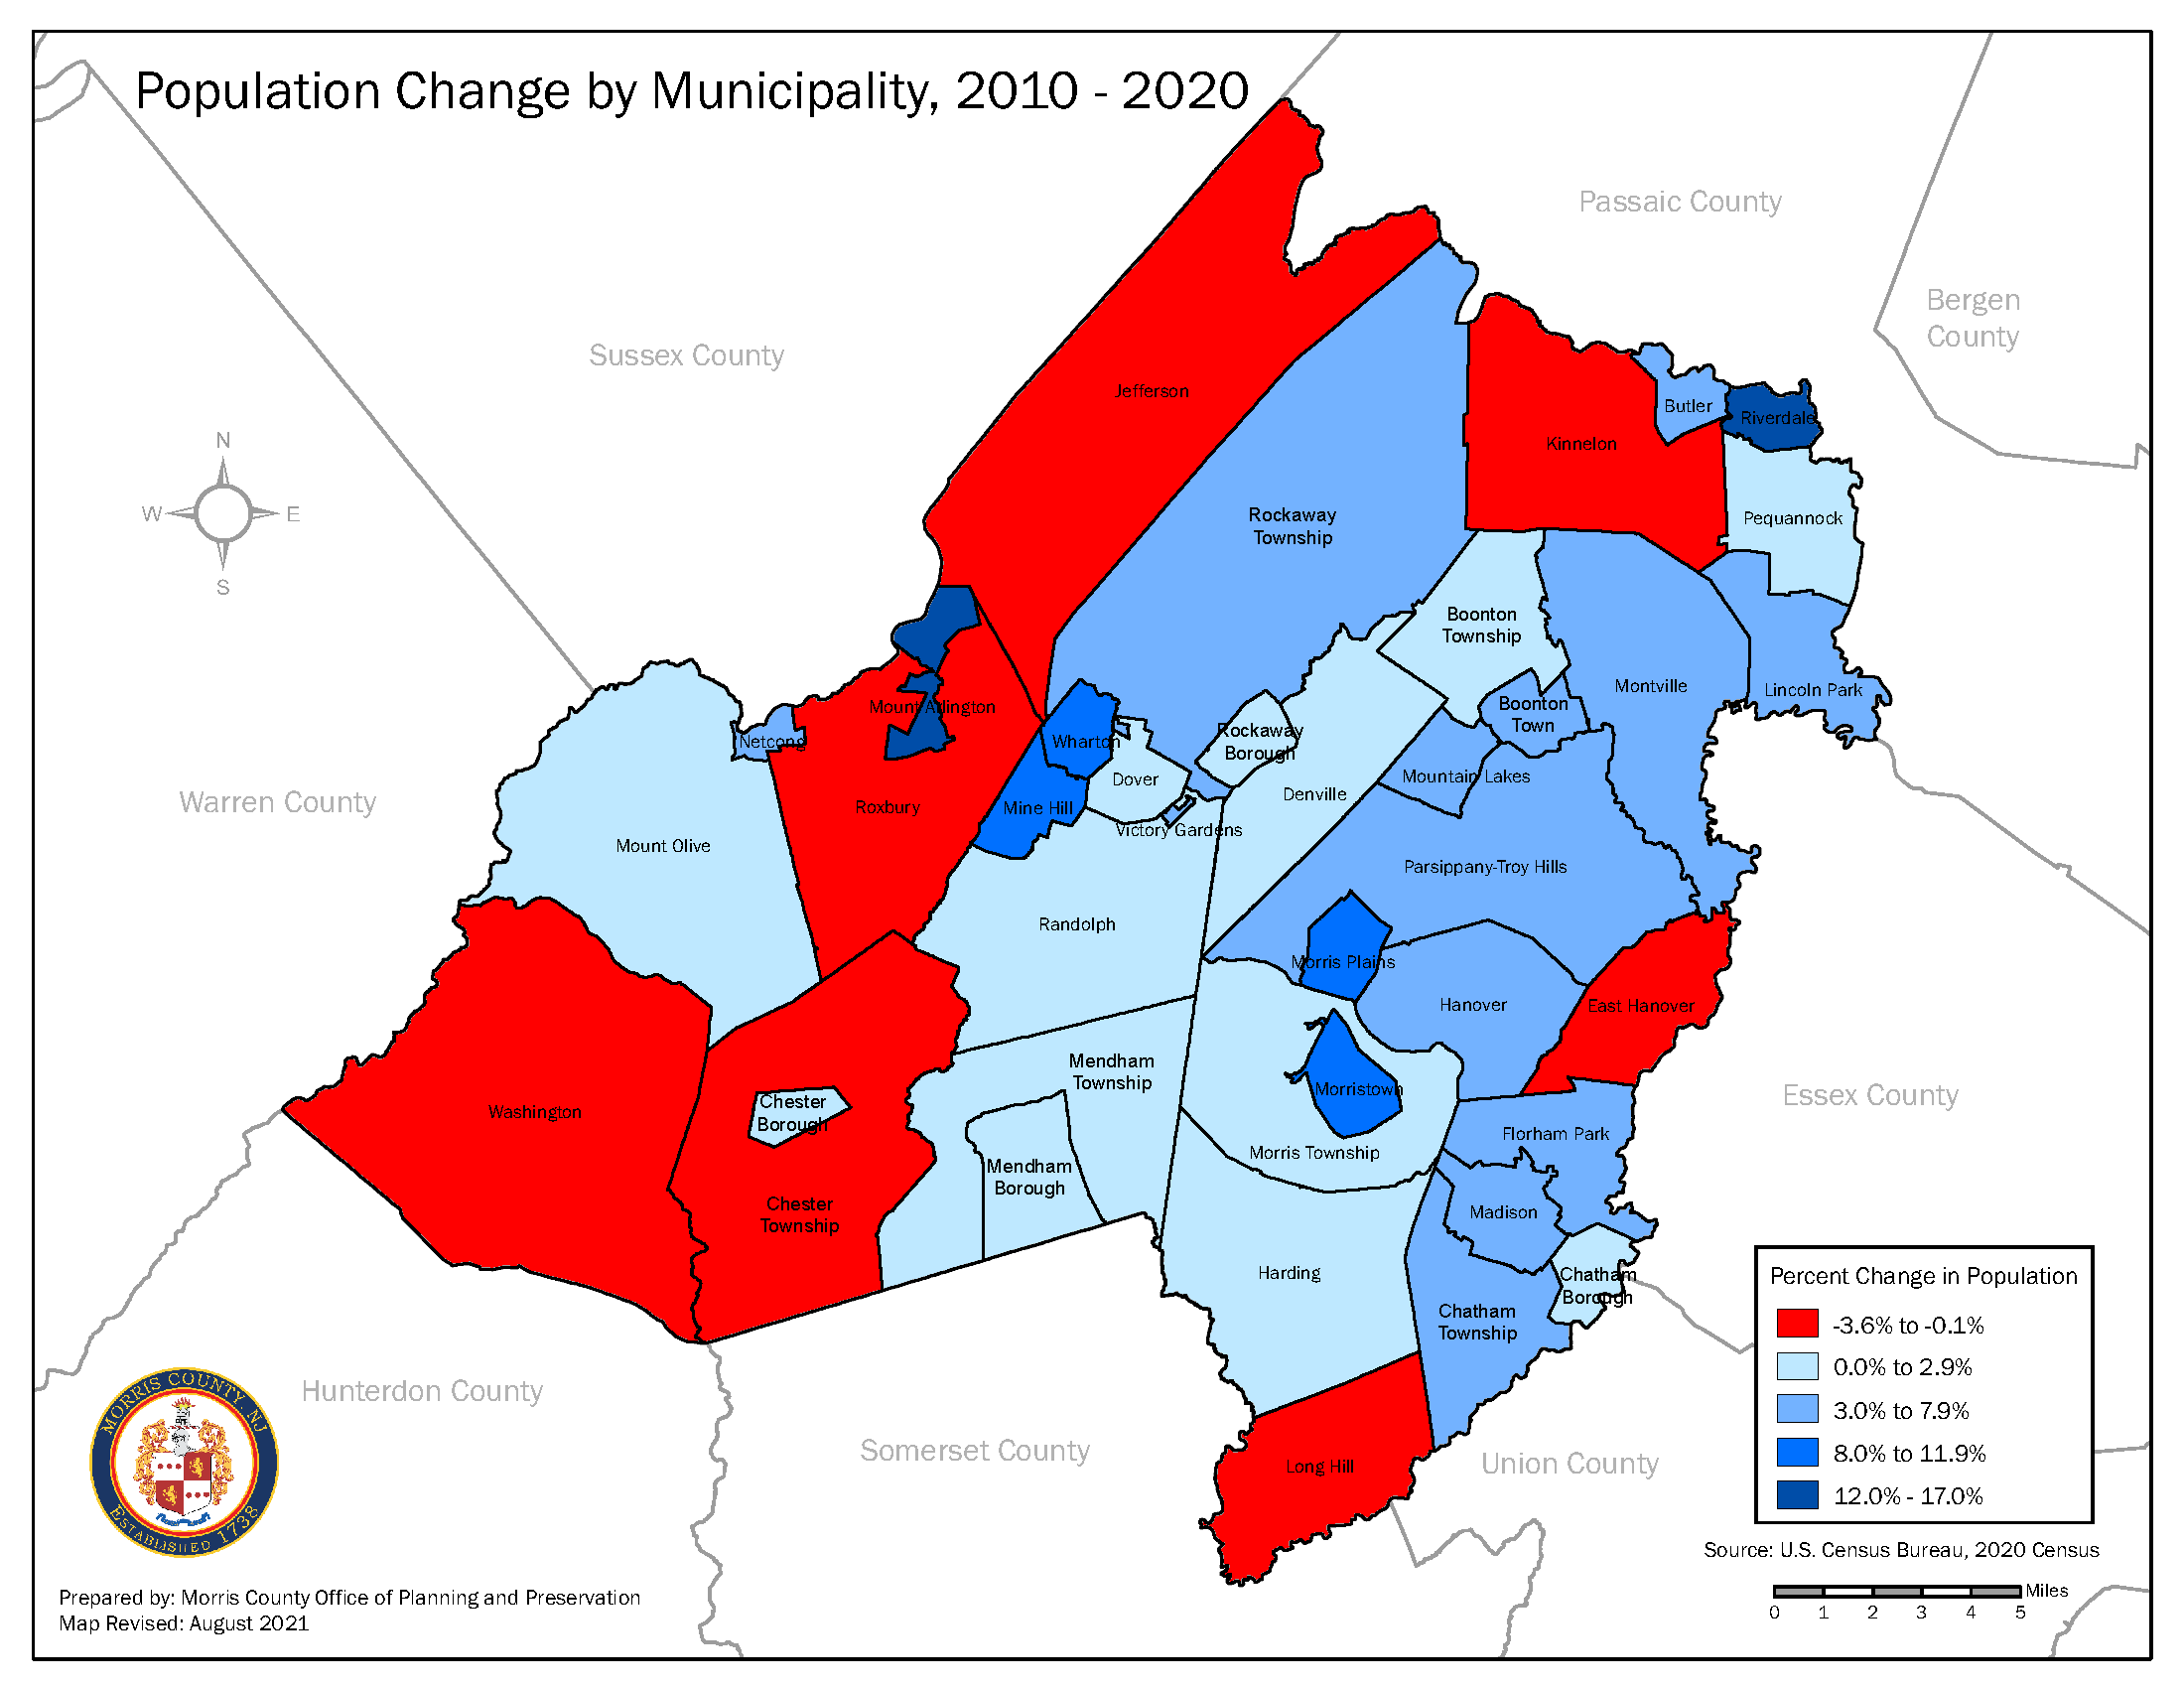 Map showing population change over the last decade. Washington, Chester Twp, Roxbury, Long Hill, East Hanover, Jefferson and Kinnelon lost population.